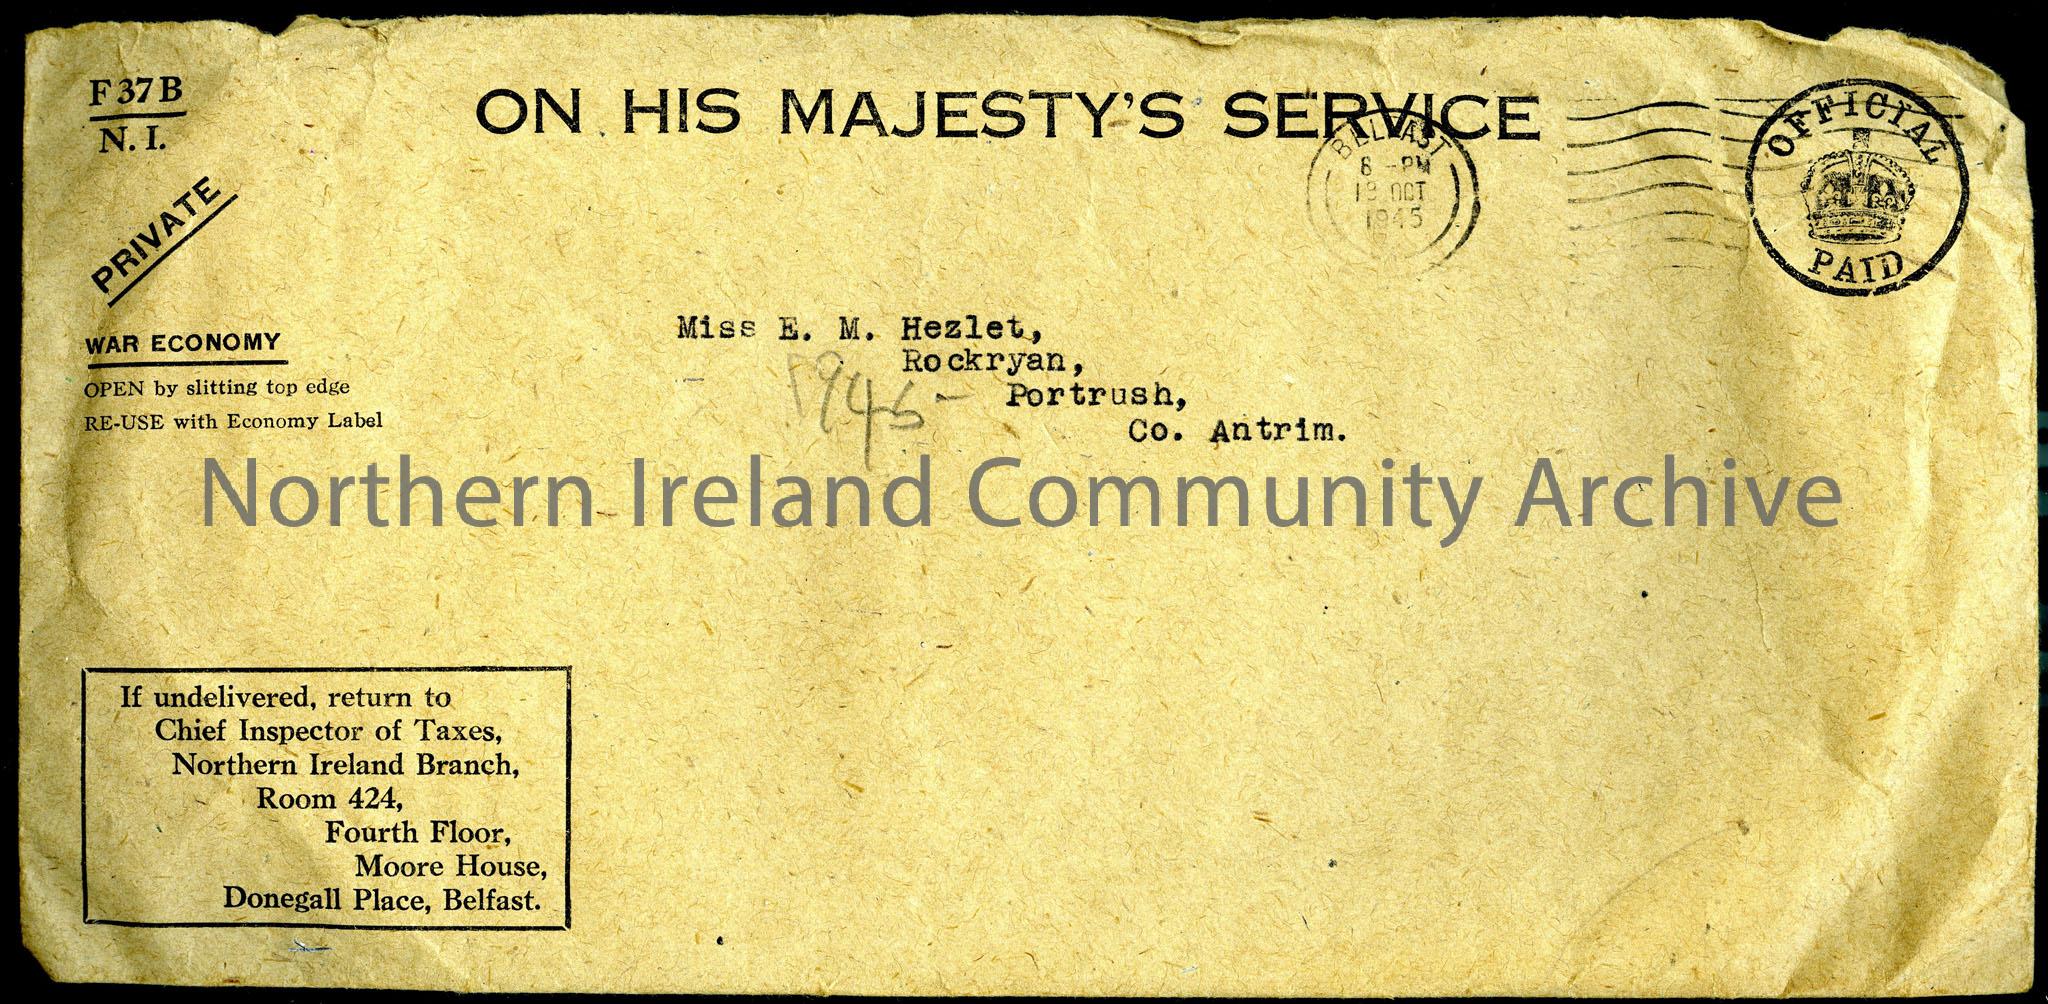 Brown paper envelope with ‘On His Majesty’s Service….Official Paid…War Economy’ etc. stamped on front. Also, address visible: ‘Miss E. M. Hezlet, …